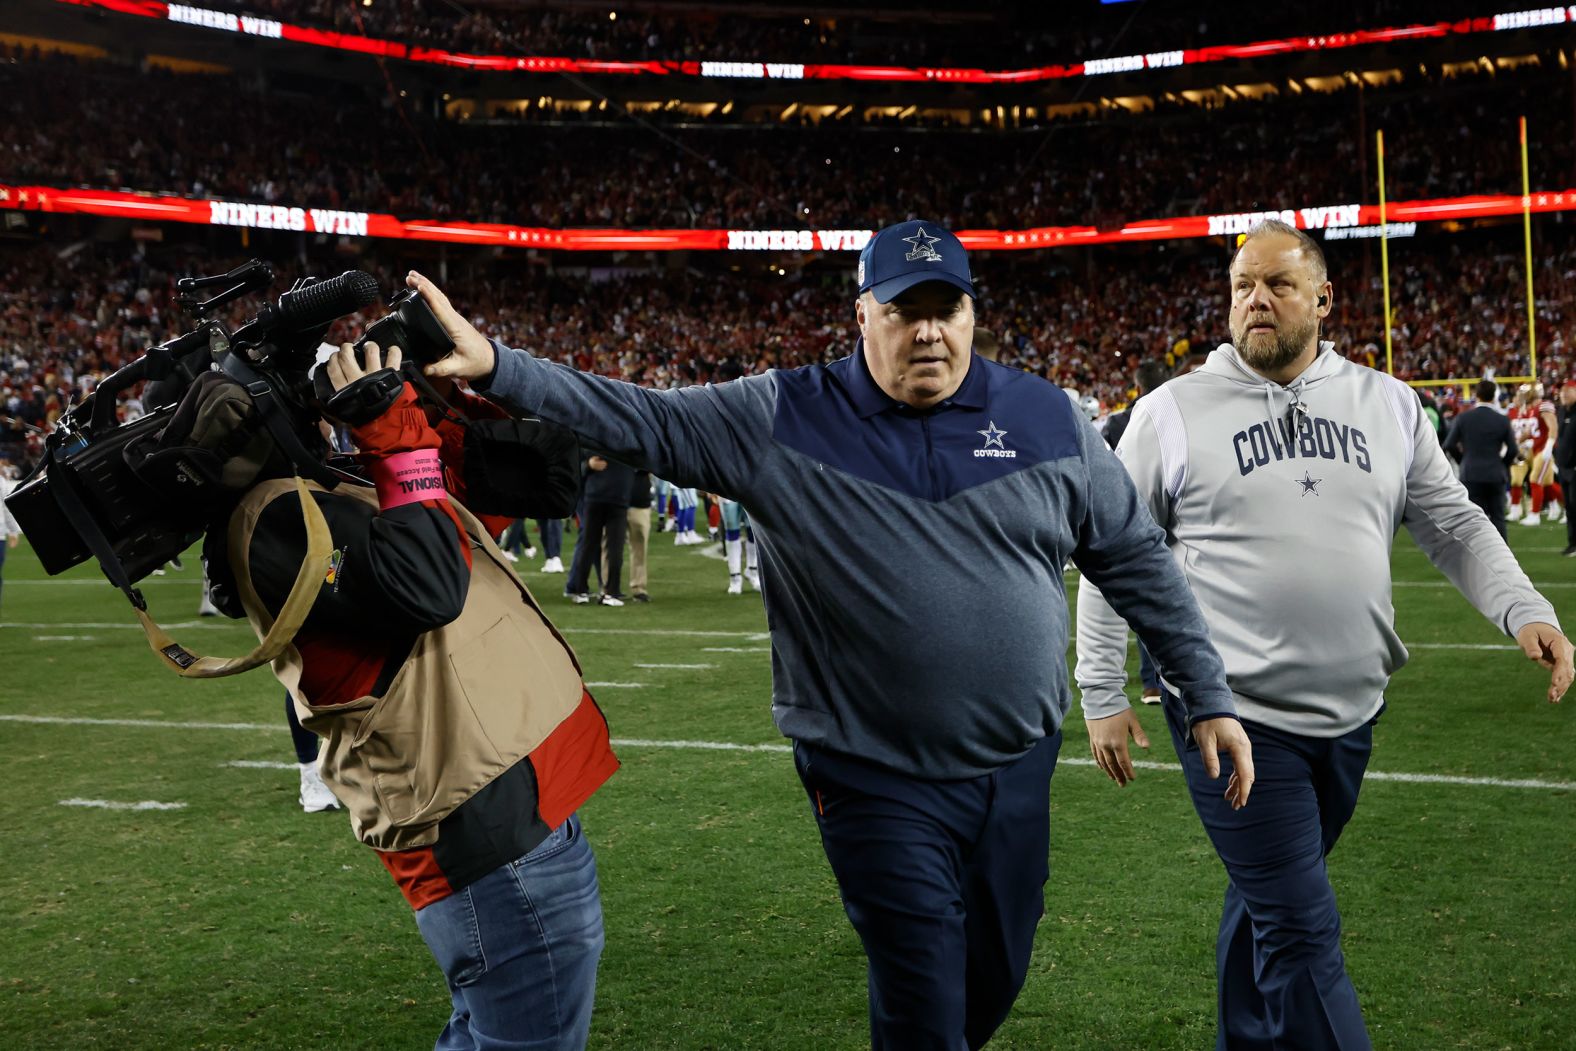 Dallas Cowboys head coach Mike McCarthy puts his hand over a cameraman's lens after losing an NFL playoff game to San Francisco on Sunday, January 22. The cameraman, Noah Bullard, <a href="index.php?page=&url=https%3A%2F%2Ftwitter.com%2Fnoah_bullard%2Fstatus%2F1617420219550666752" target="_blank" target="_blank">later tweeted</a> that McCarthy apologized to him. <a href="index.php?page=&url=http%3A%2F%2Fwww.cnn.com%2F2022%2F09%2F12%2Fsport%2Fgallery%2Fnfl-2022-season%2Findex.html" target="_blank">See the best photos from this NFL season</a>.